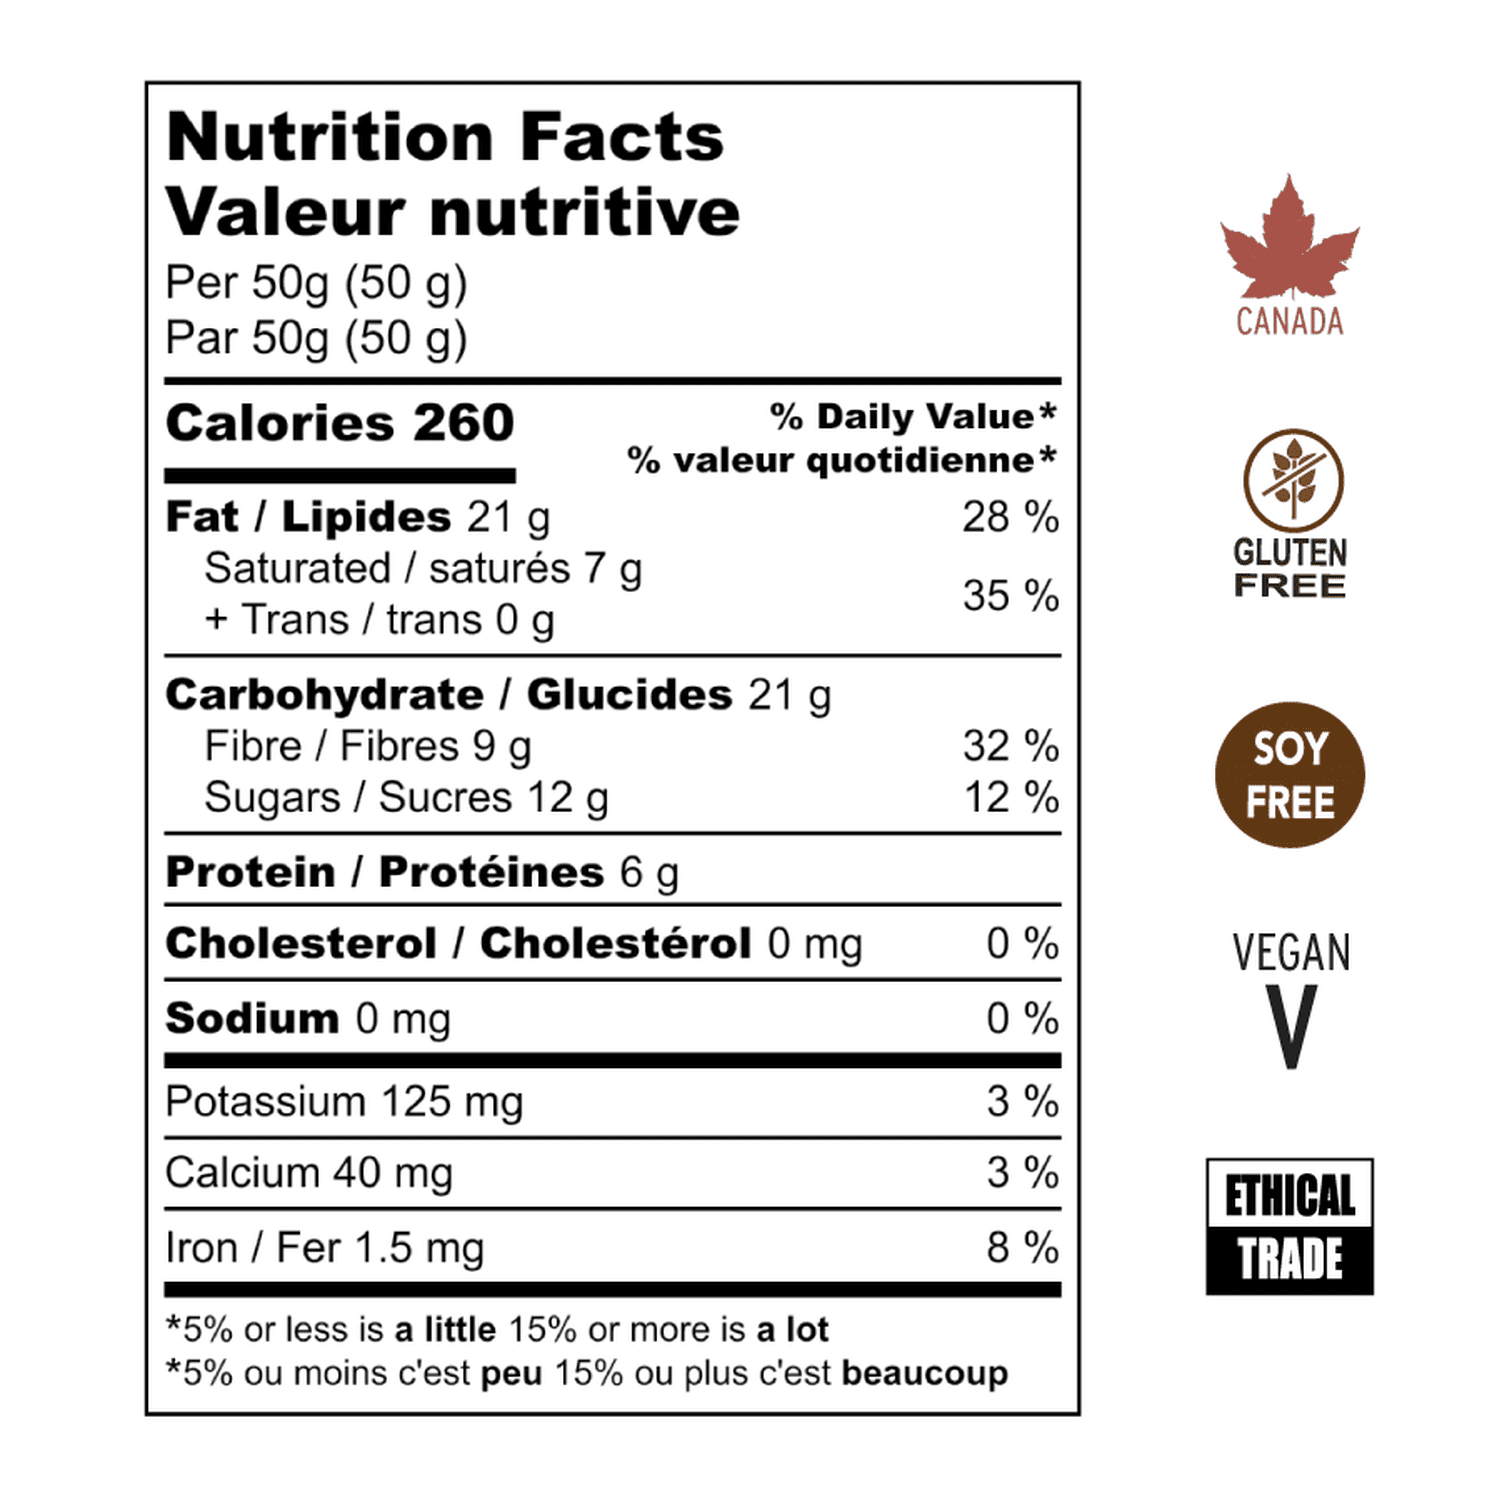 Nutritional Facts for Dark Chocolate Covered Hazelnuts. Soy Free, Gluten Free, Vegan, Ethical Trade, Made in Canada.